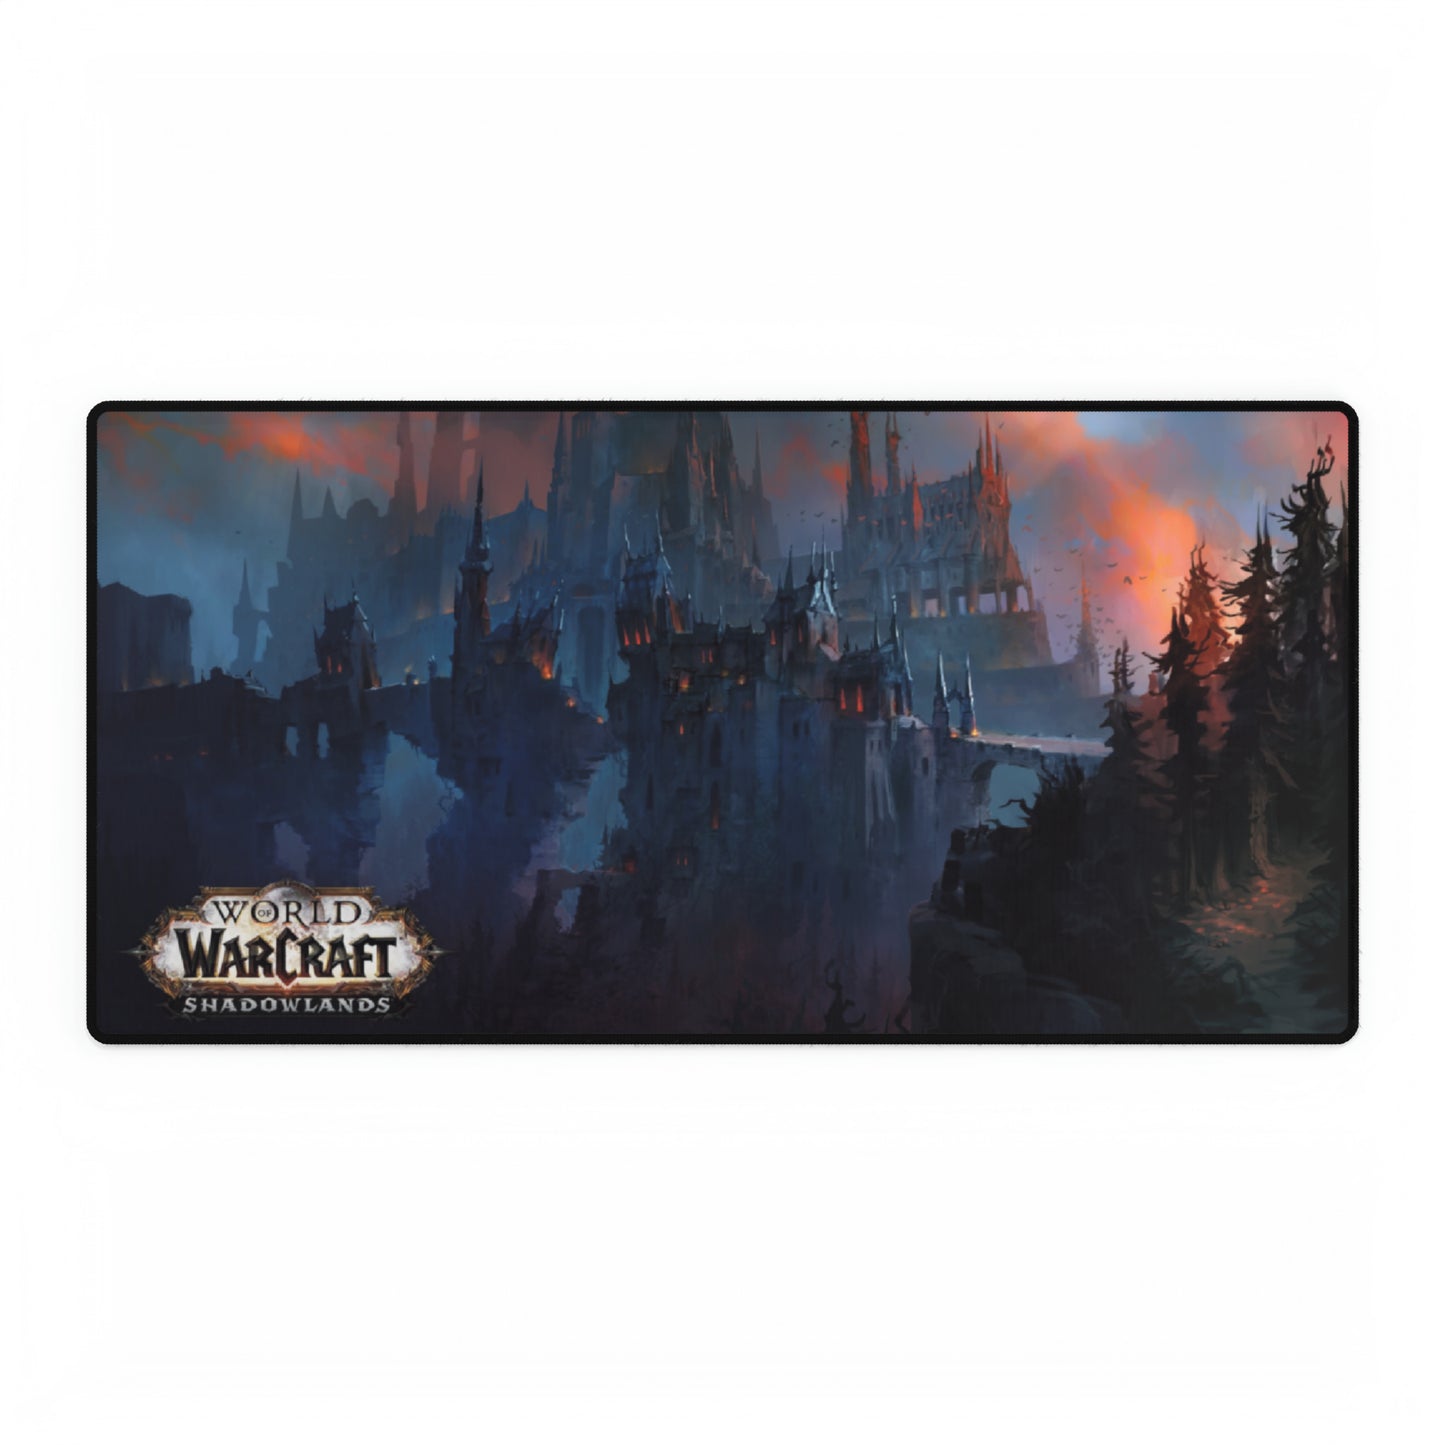 WoW Warcraft Shadowlands High Definition PC PS Video Game Desk Mat Mousepad